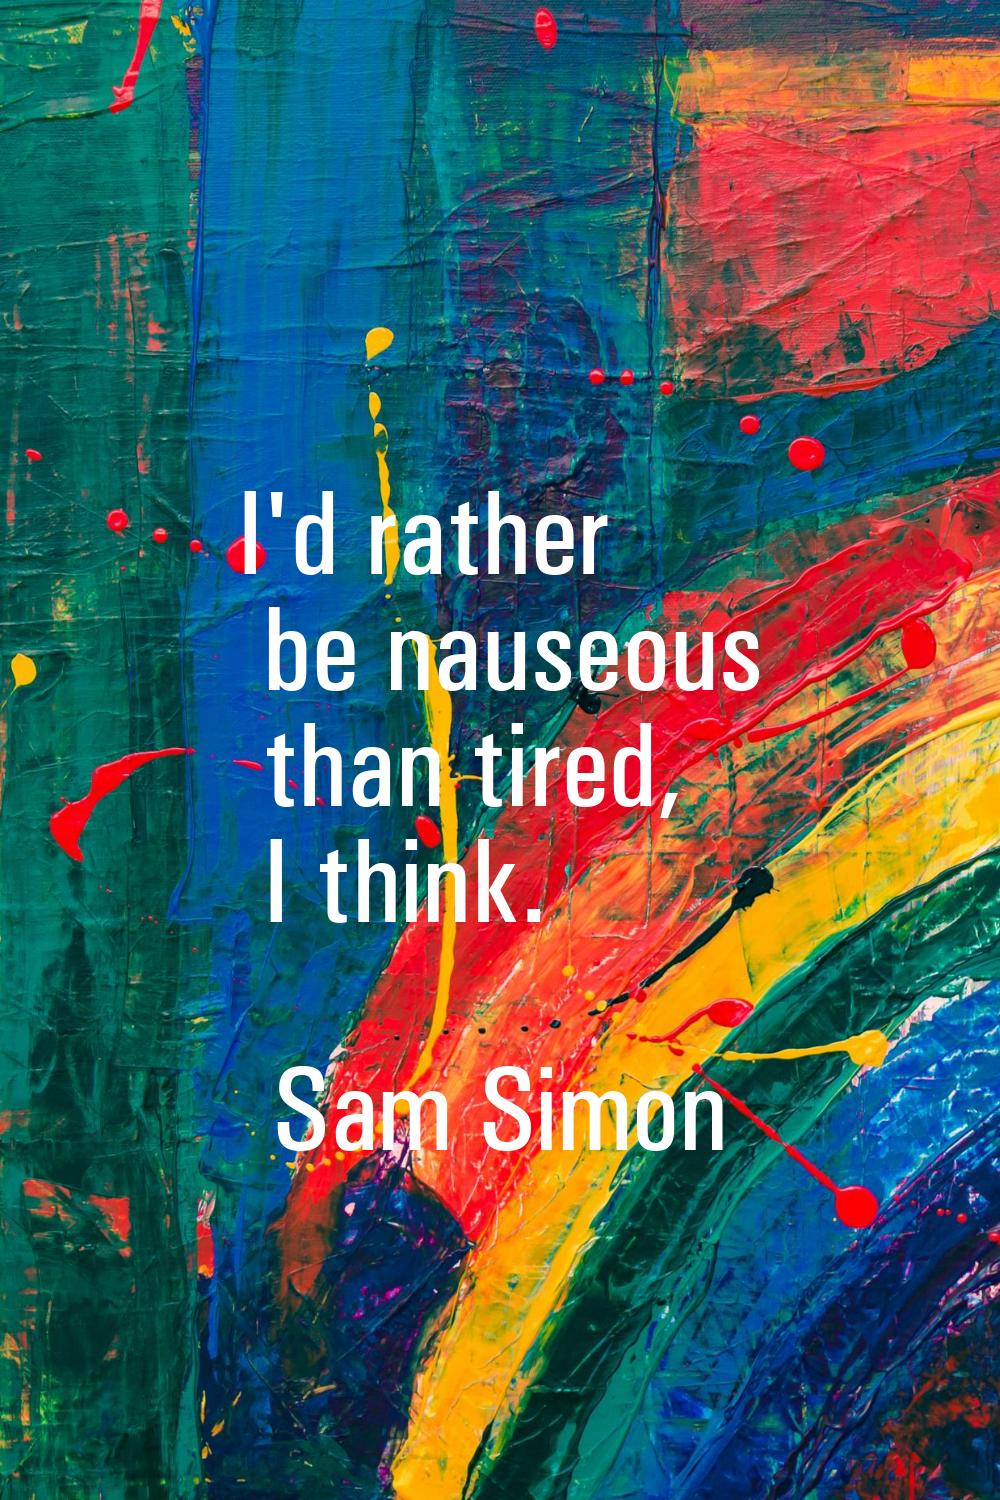 I'd rather be nauseous than tired, I think.